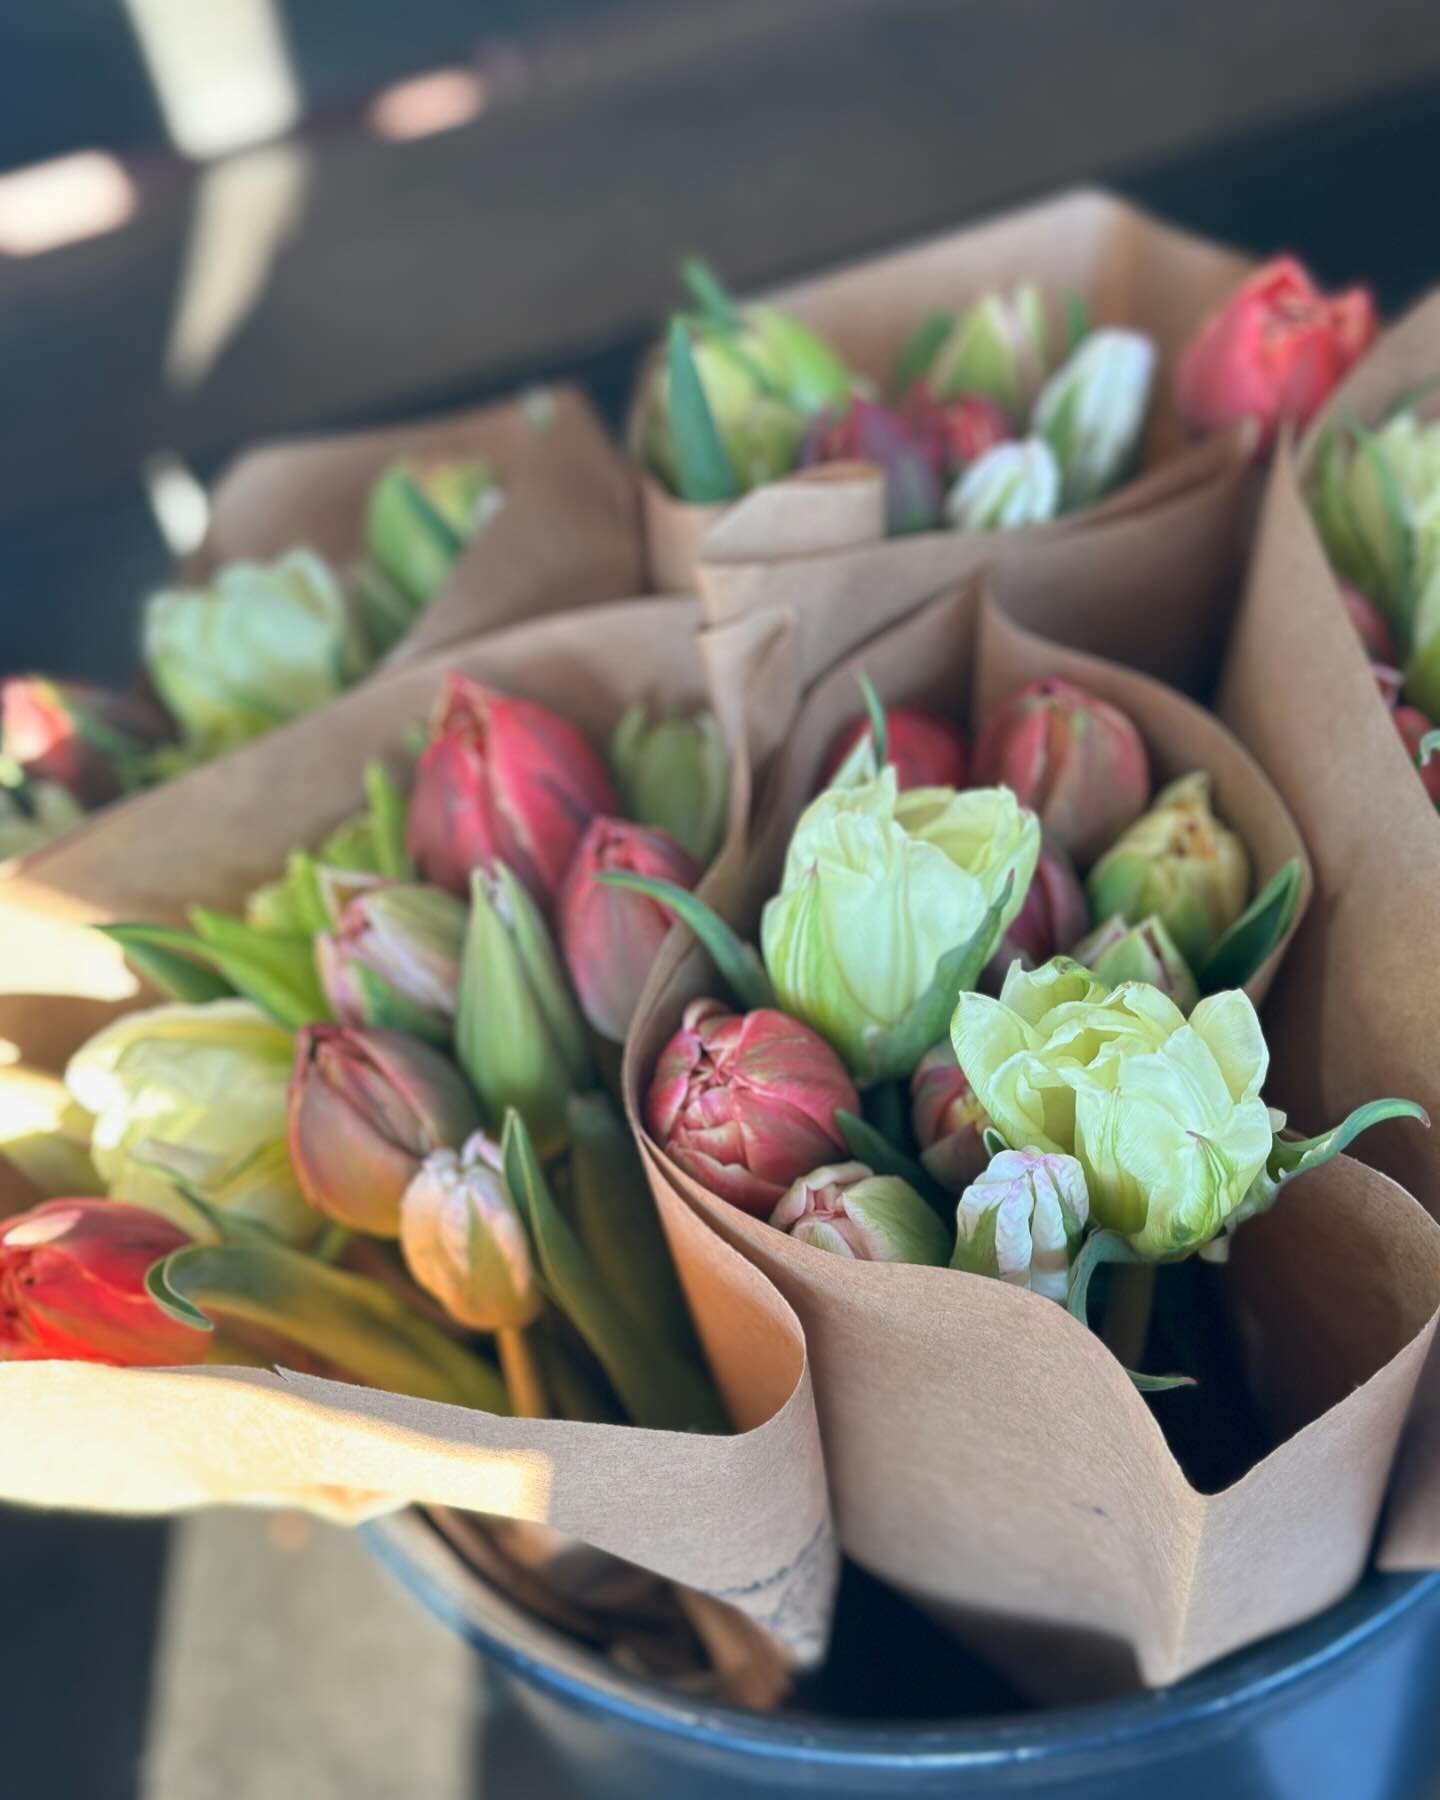 Looking for a flower fix? Just dropped off beautiful tulip bunches to @sweetsbysarahbakery in Fair Haven! 

They don&rsquo;t look like much now, but these tulips will open to be big and beautiful in no time. I grew some new types and colors this year